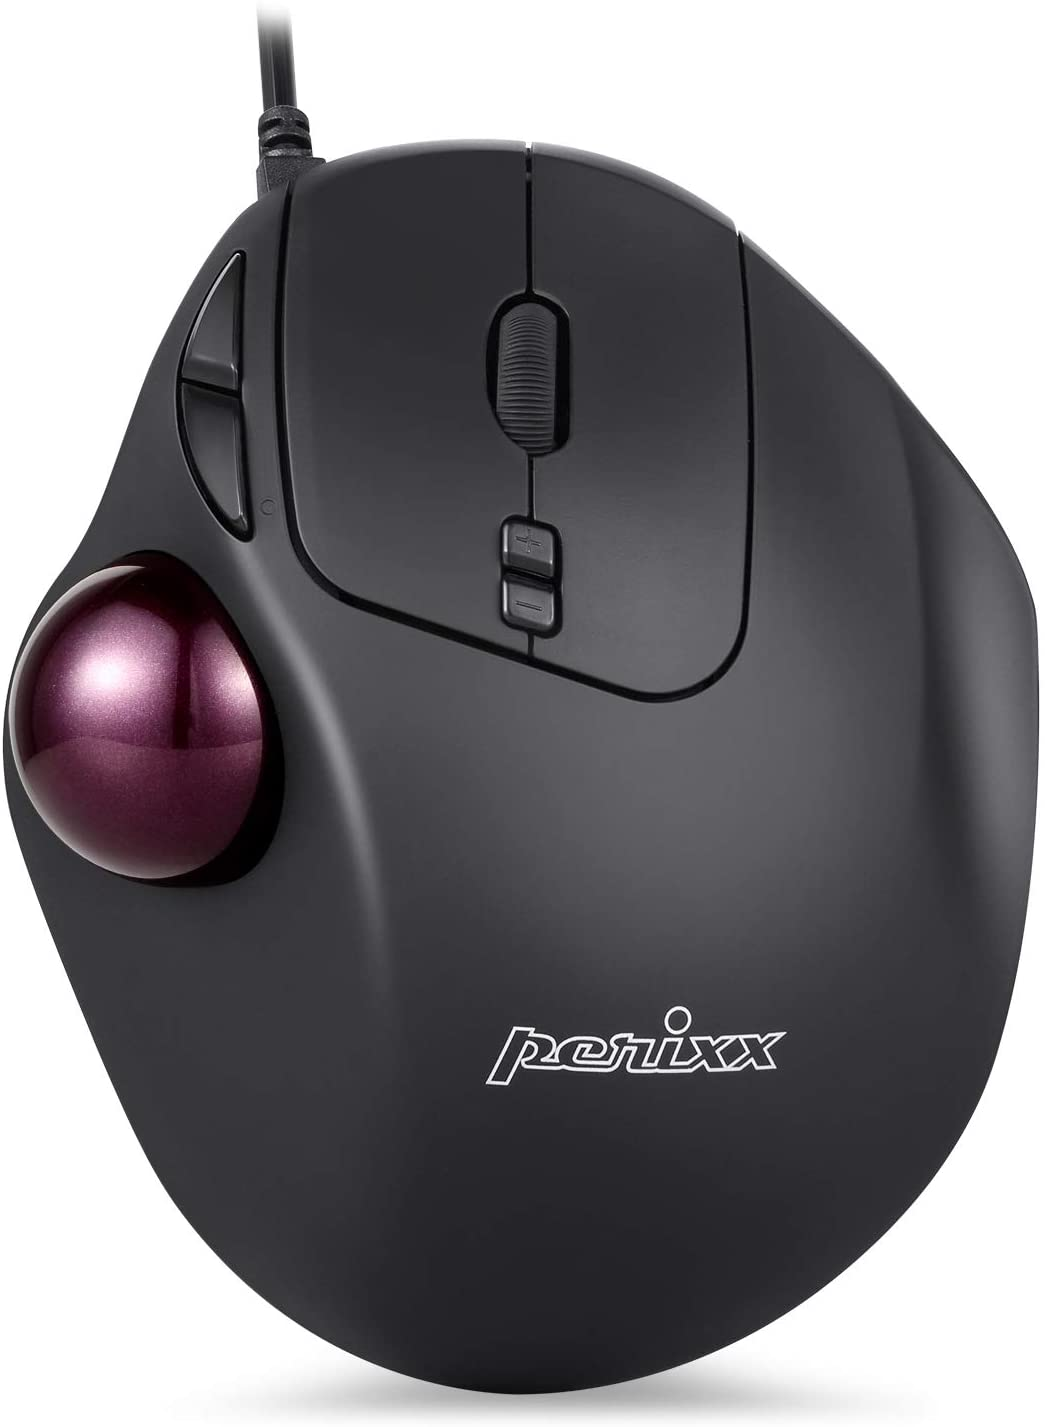 Perix  Wired Trackball USB Mouse, 7 Button Design, Build-In 1.34 Inch Trackball with Pointing Feature